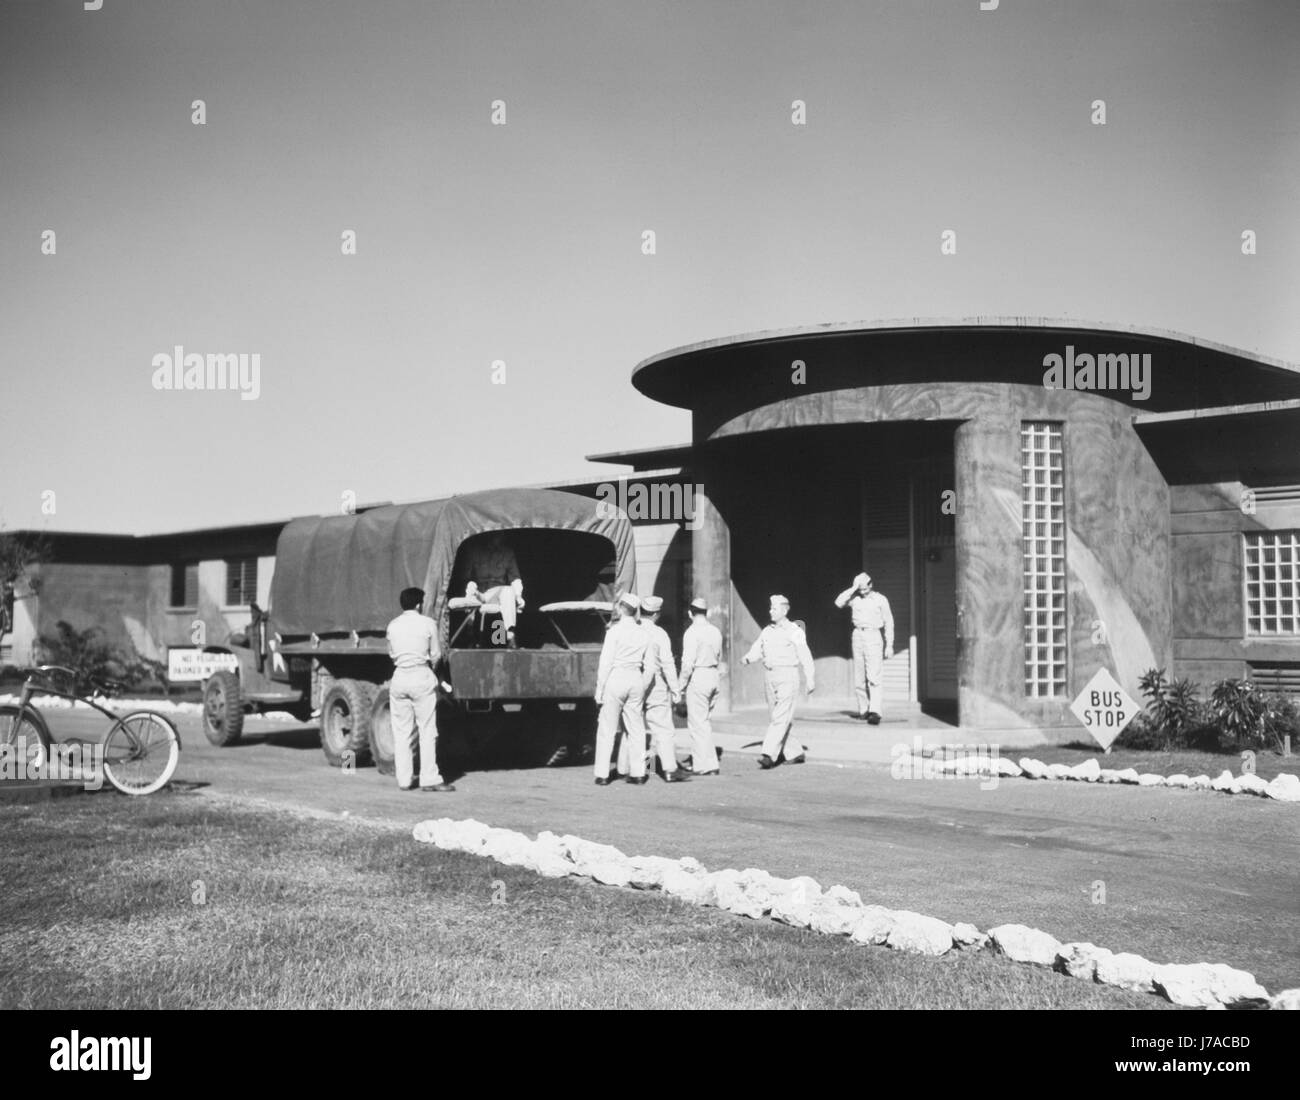 Military base of the United States Army air transport command, circa 1943. Stock Photo